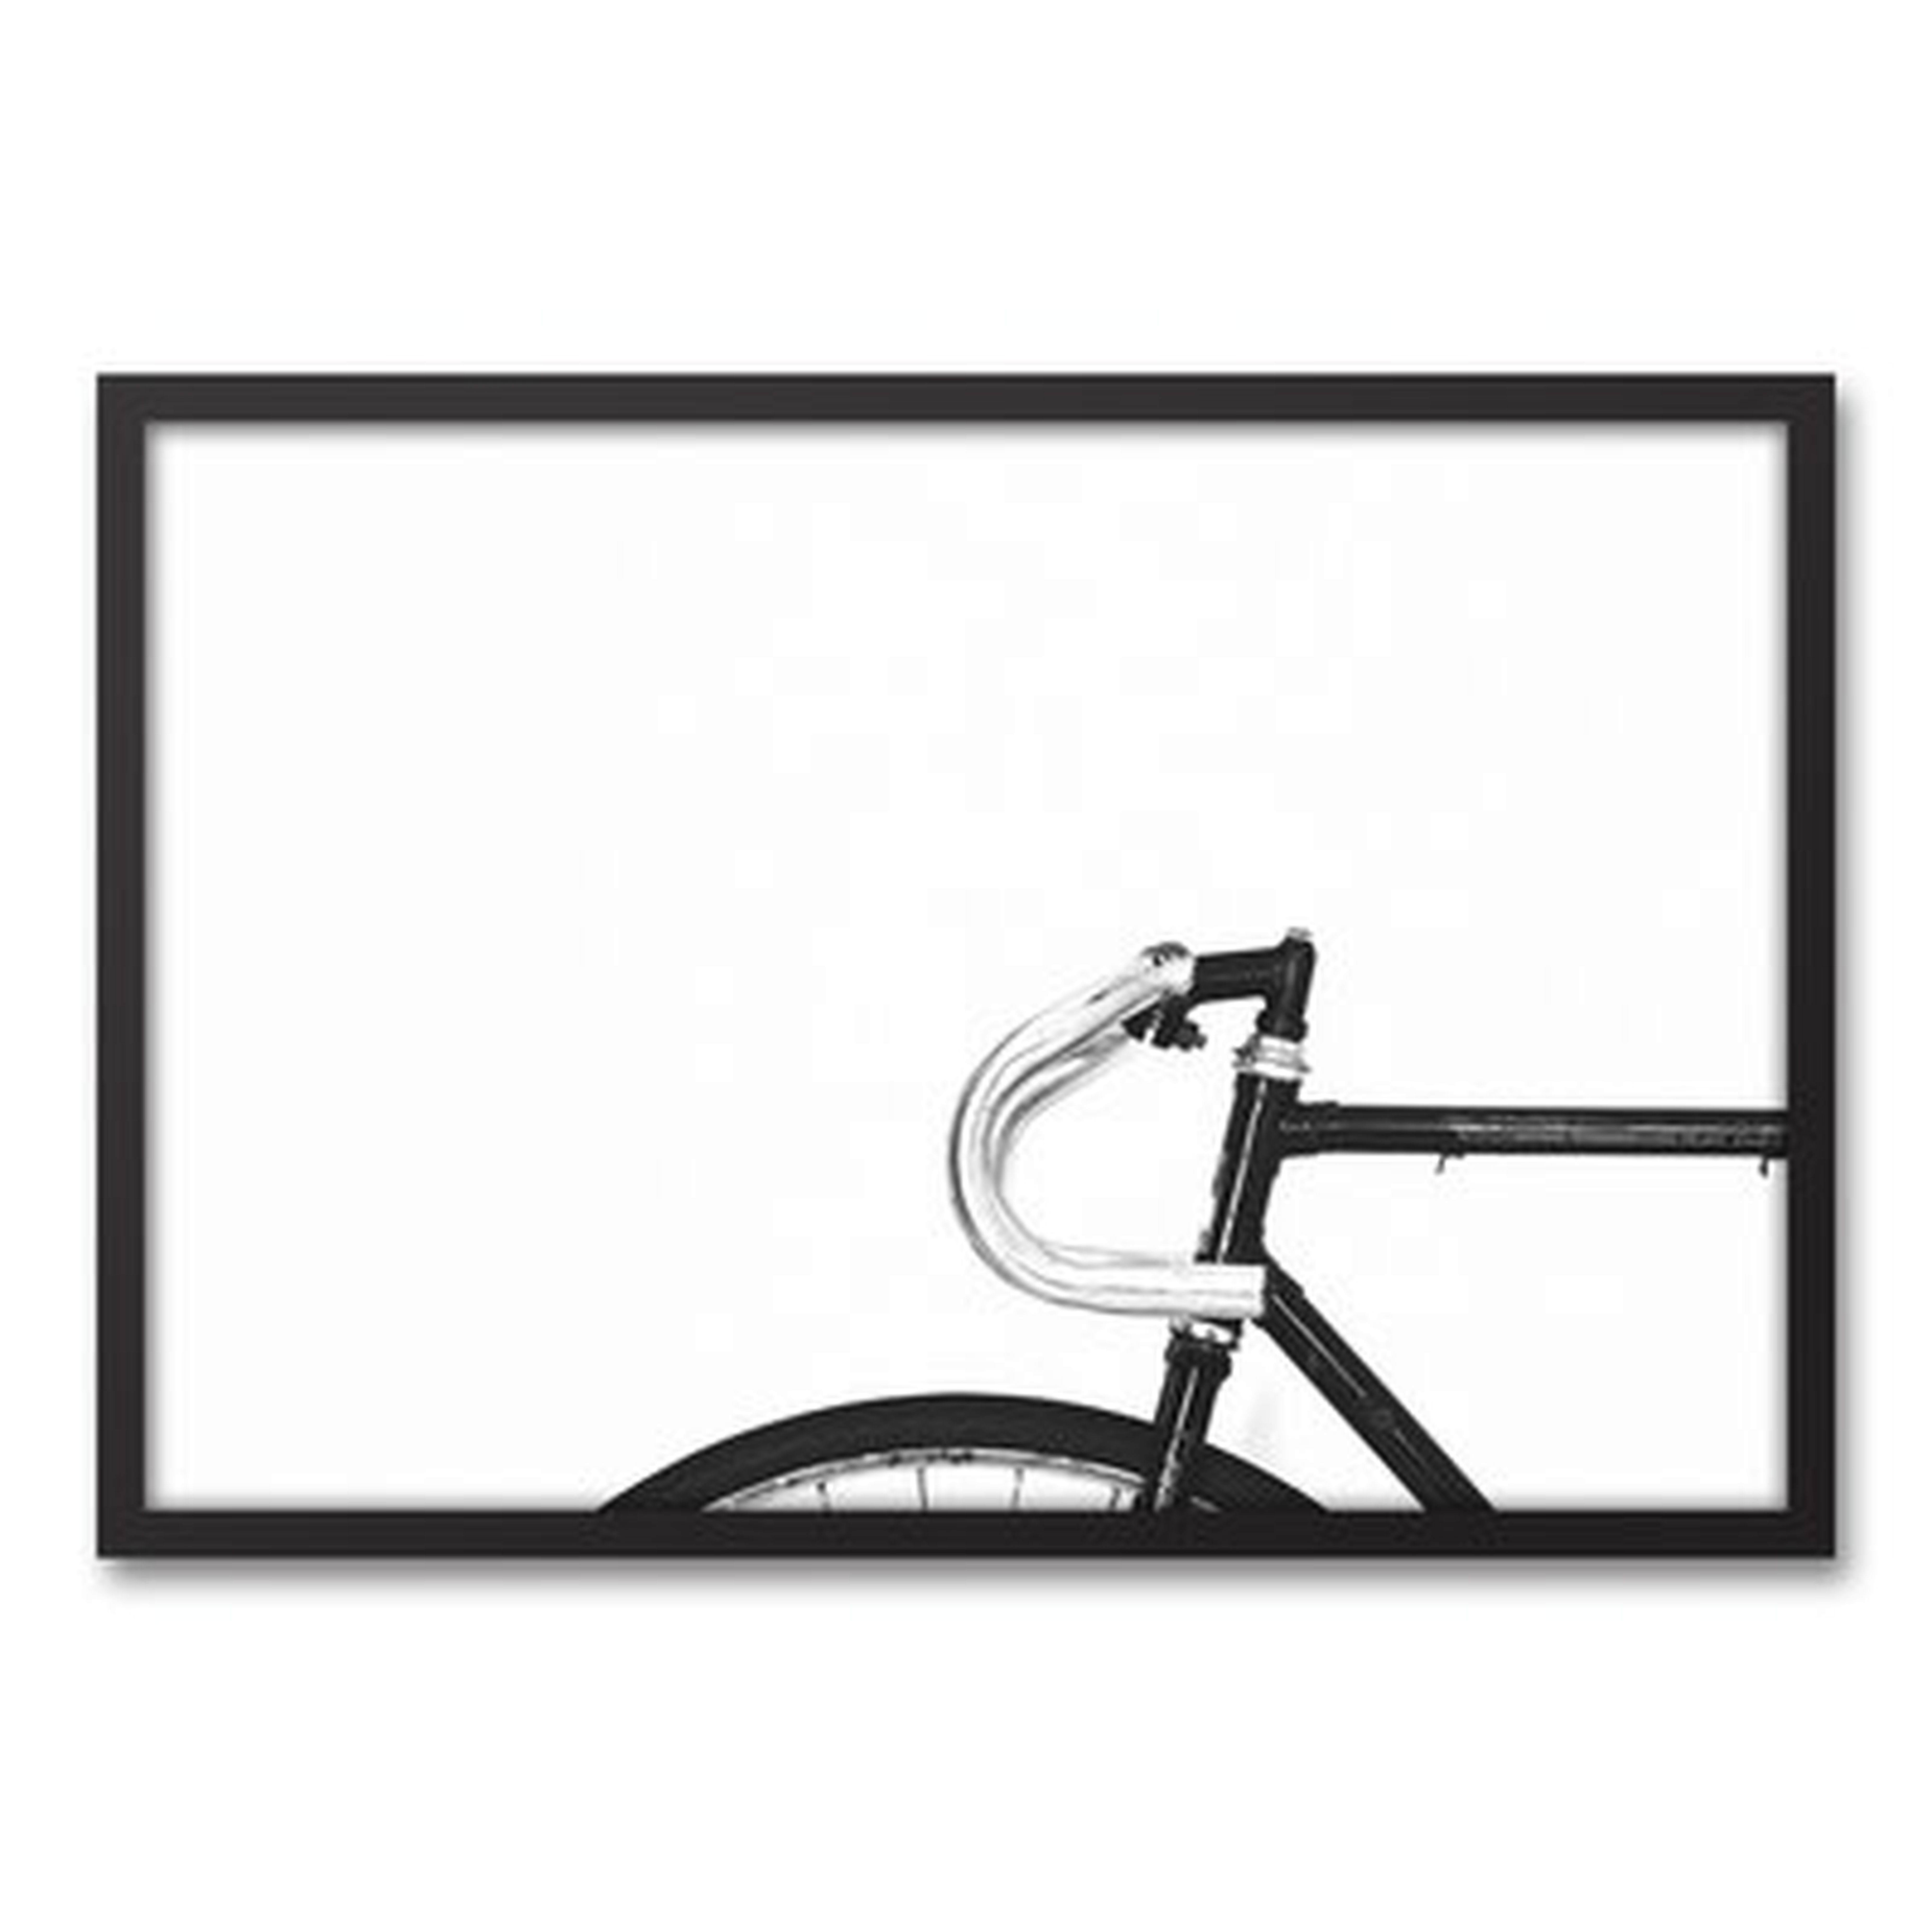 'Black And White Vintage Bicycle' Framed Photograph On Canvas - AllModern